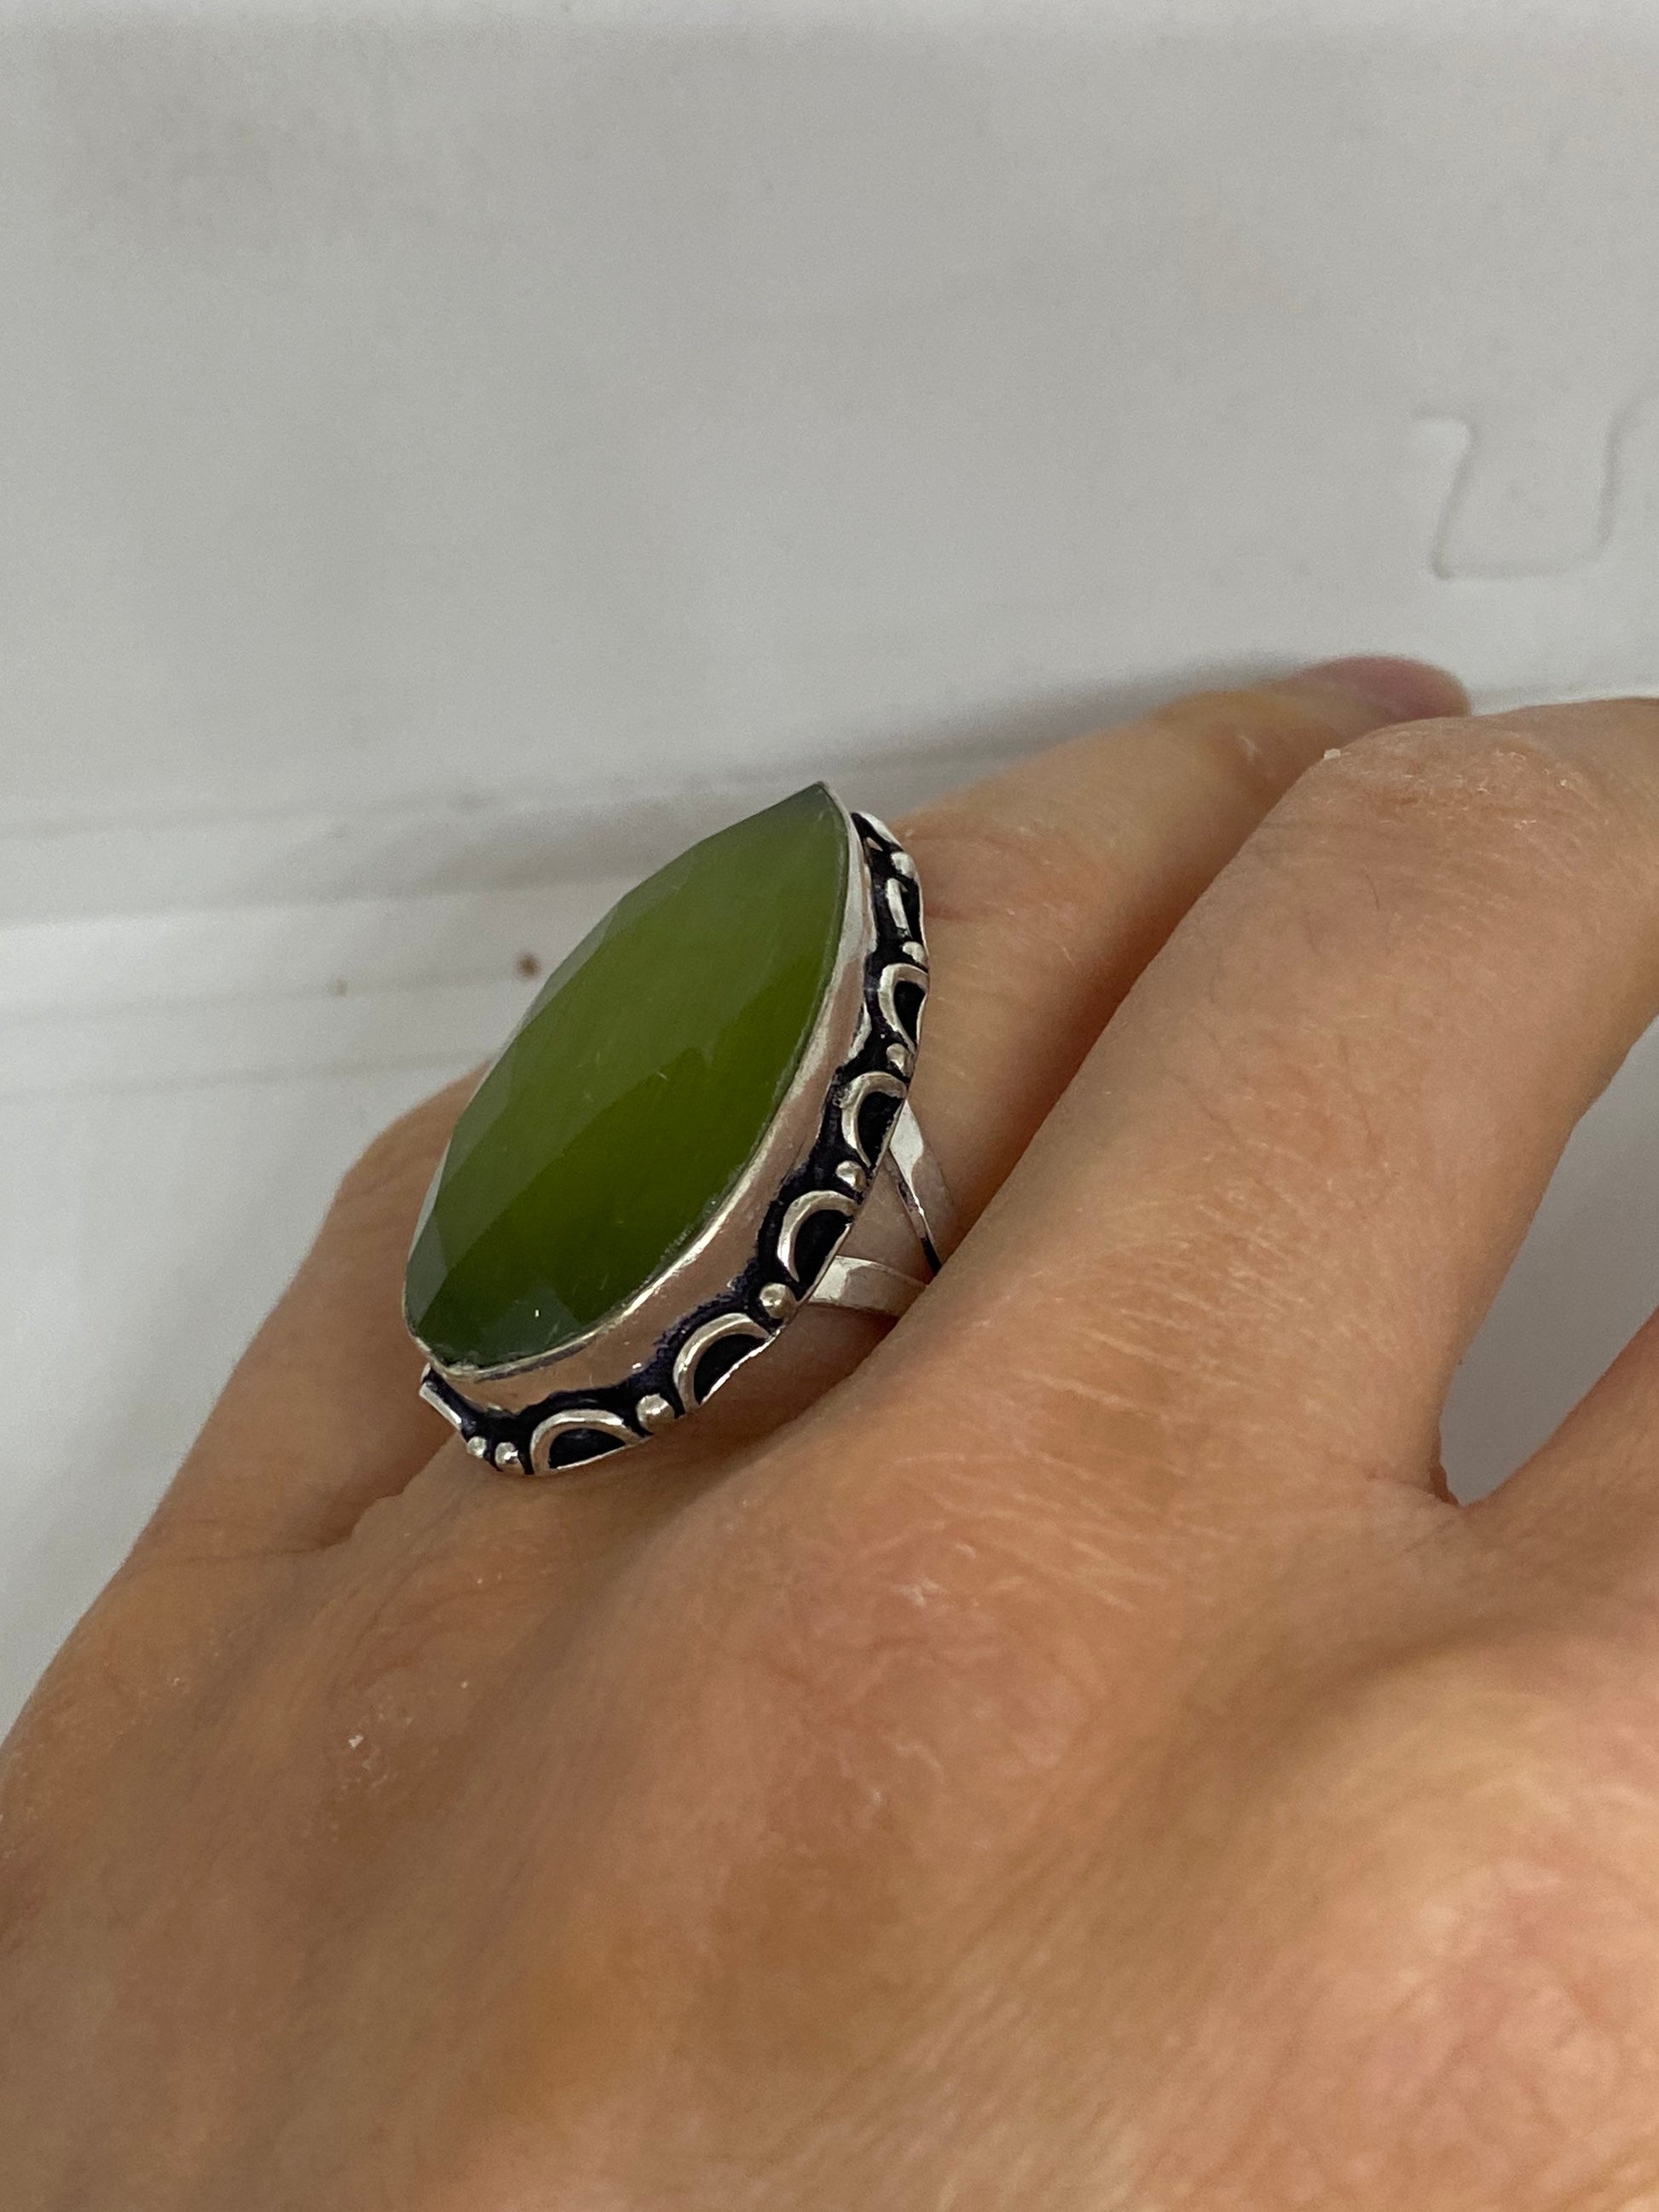 Vintage Green Cats Eye Art Glass Ring Size 7.25